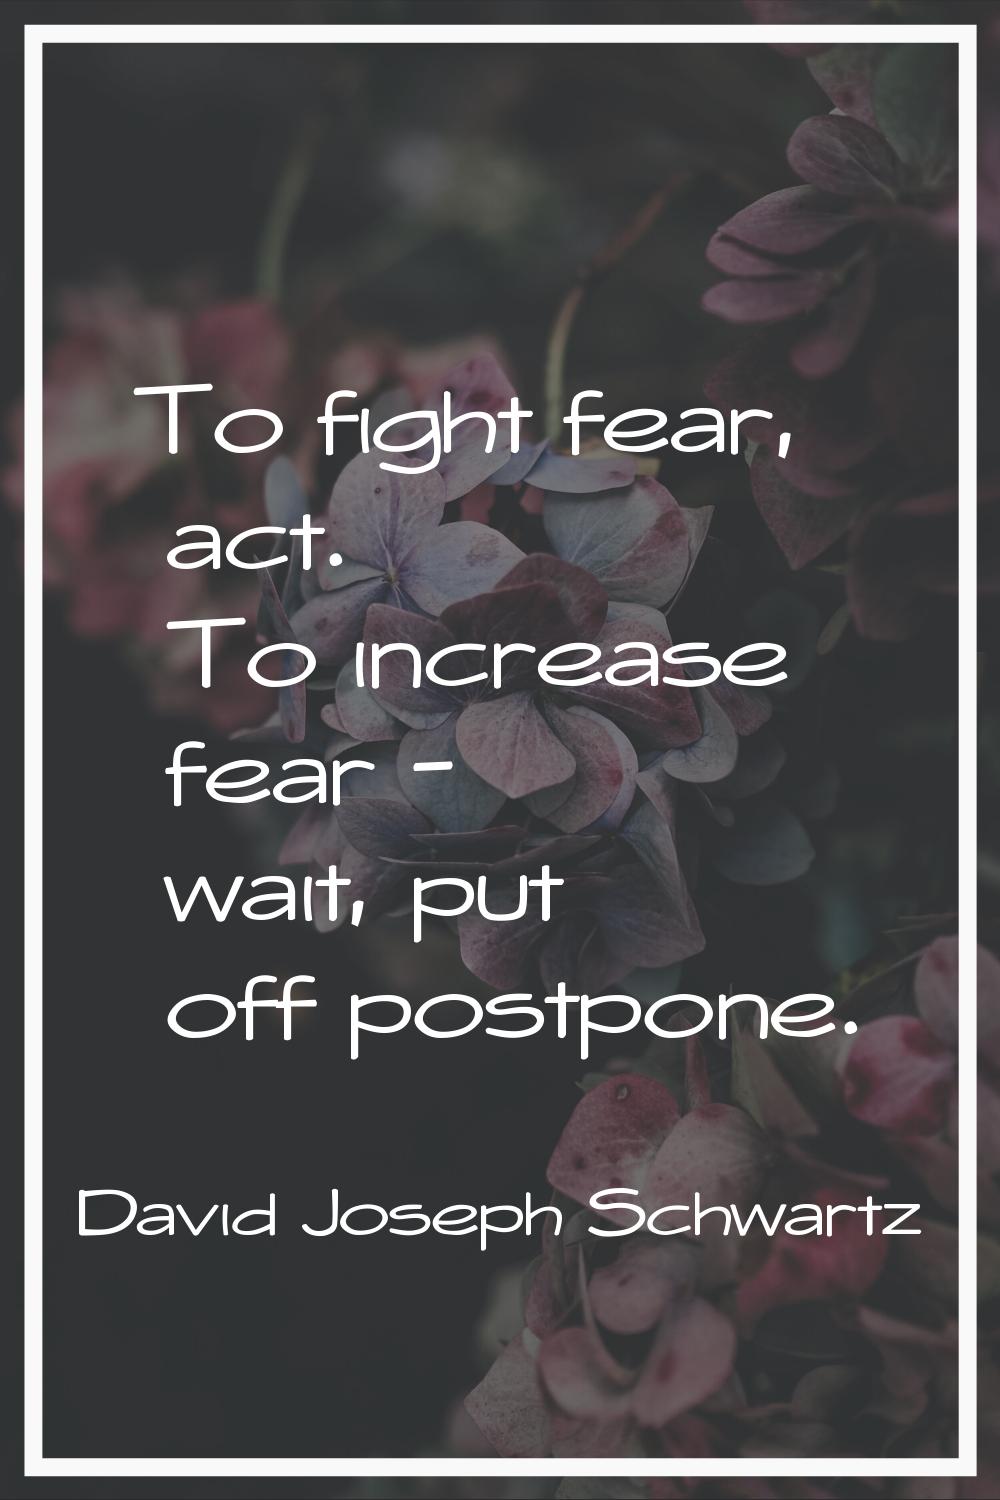 To fight fear, act. To increase fear - wait, put off postpone.